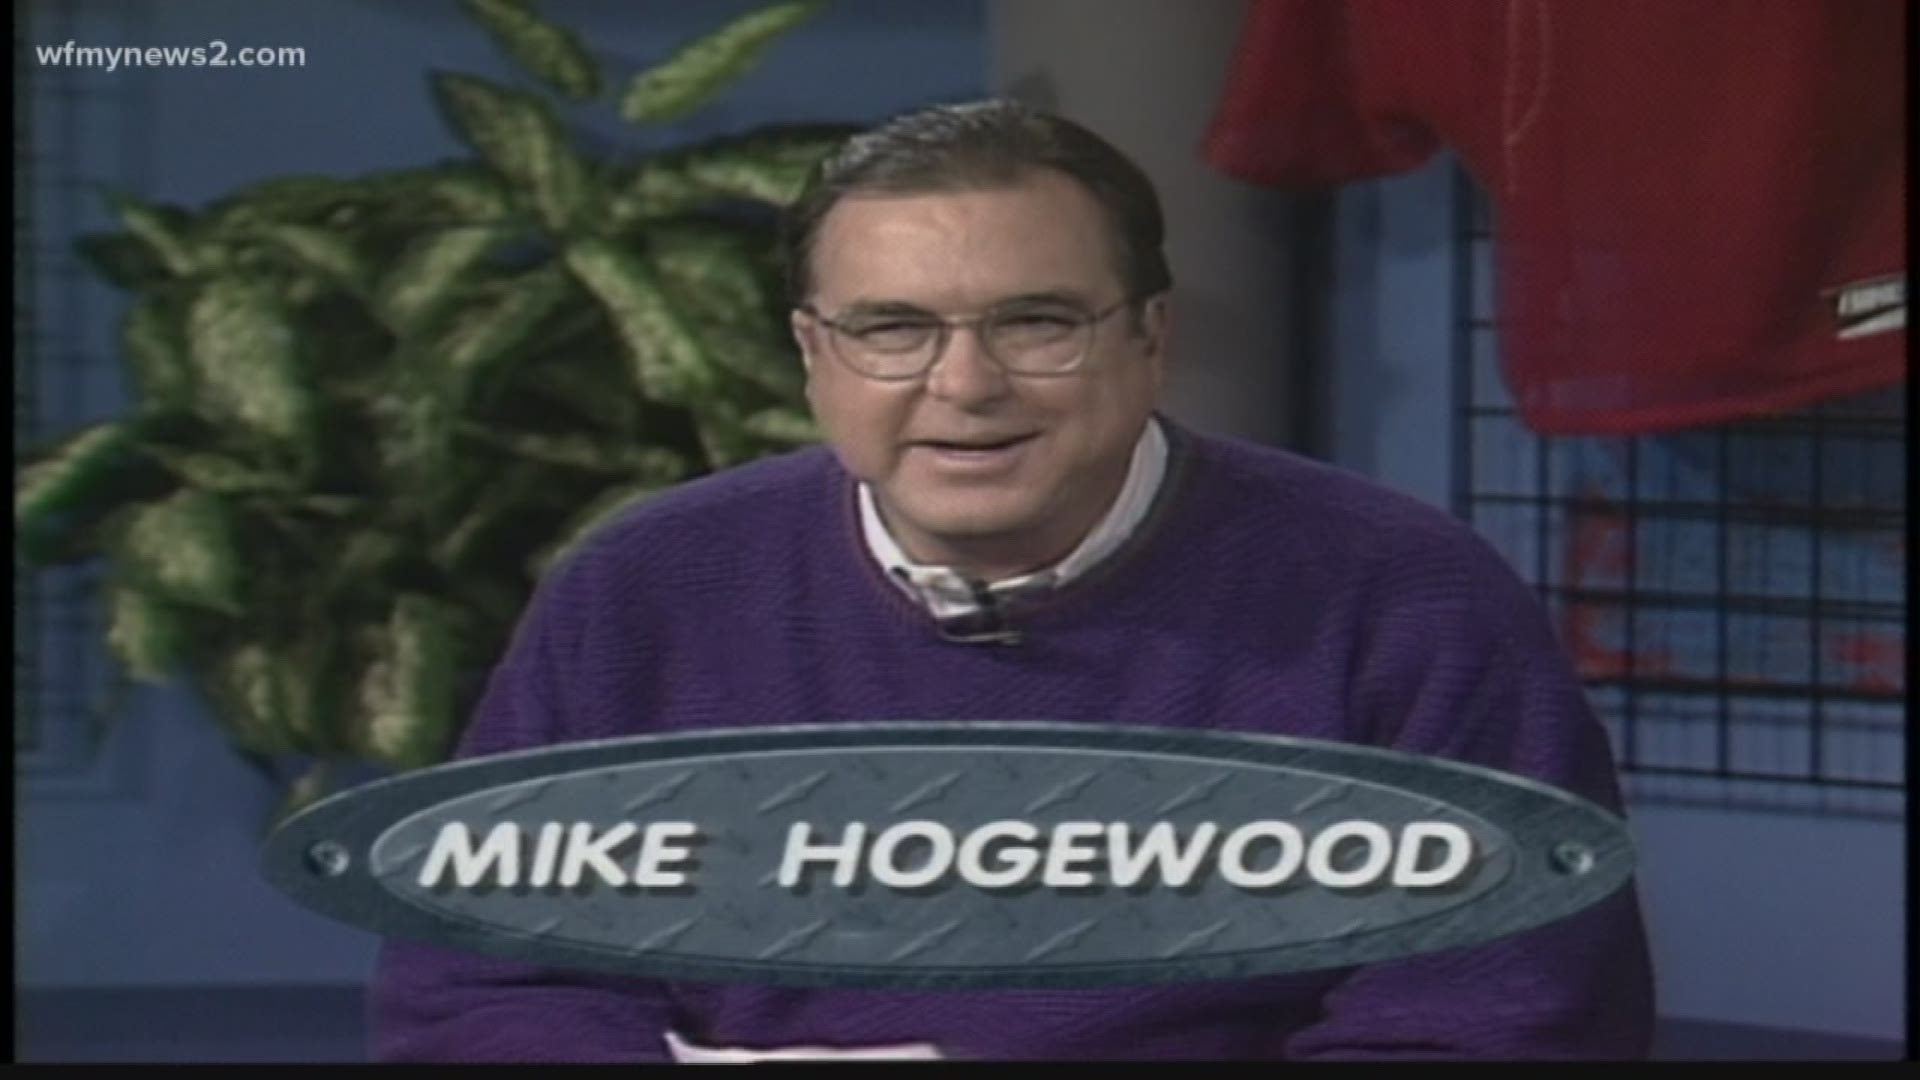 former-wfmy-news-2-anchors-sports-community-remember-mike-hogewood